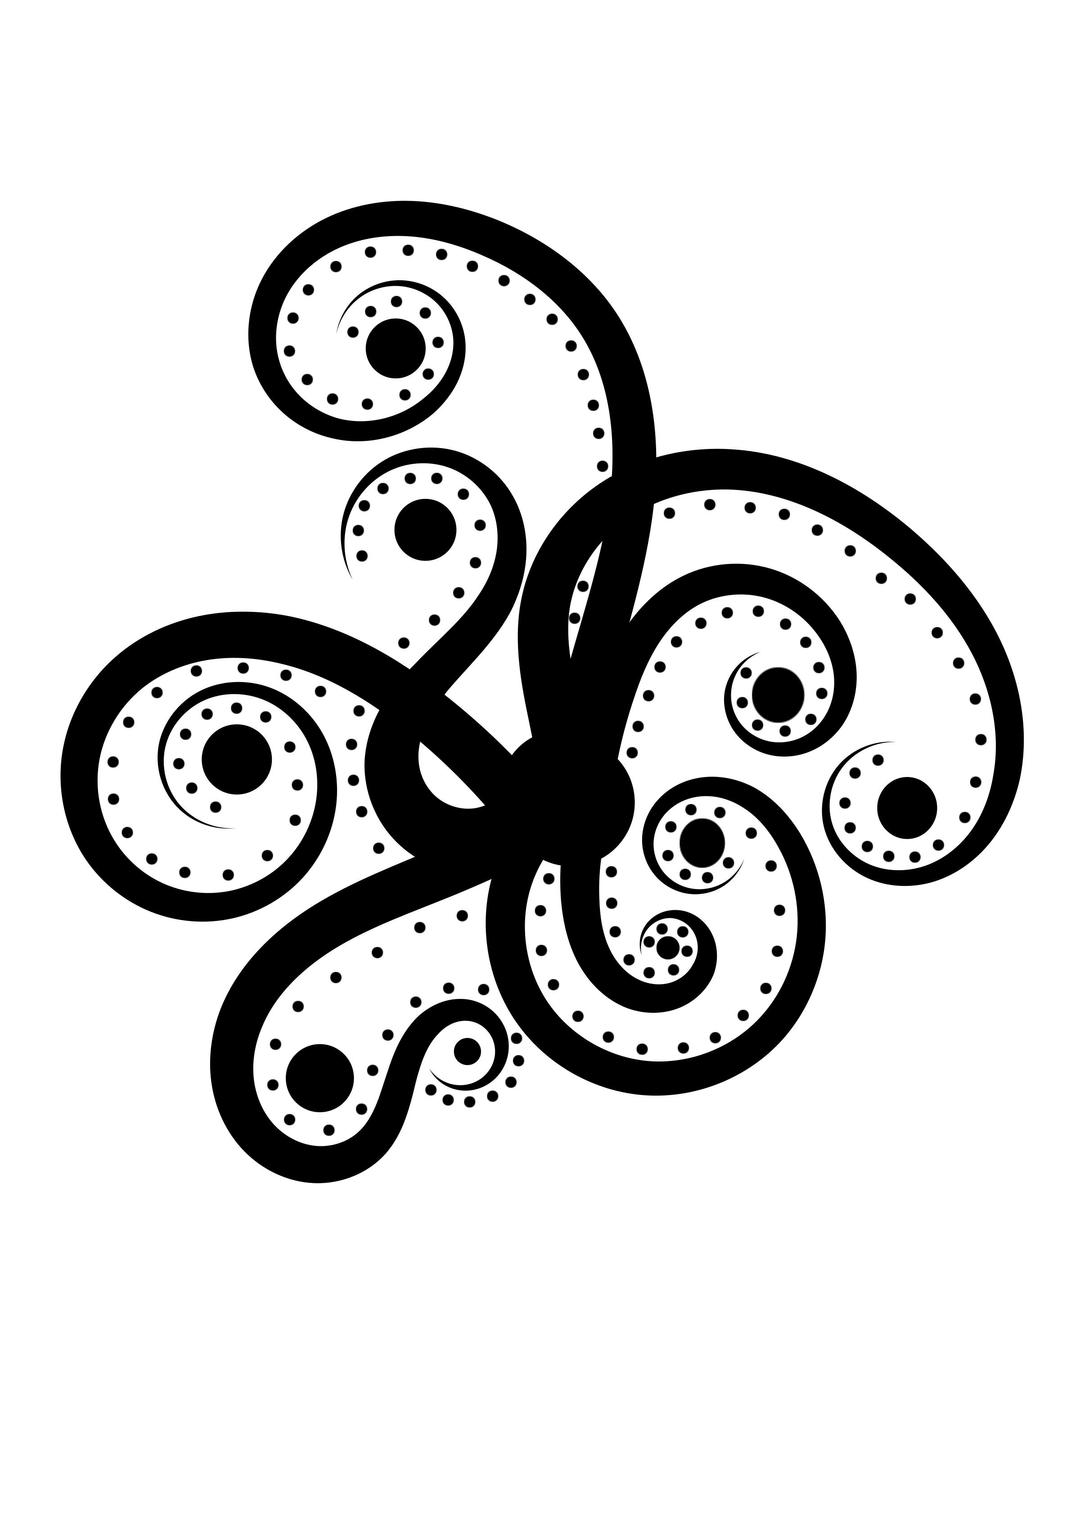 BW Abstract Octopus png transparent